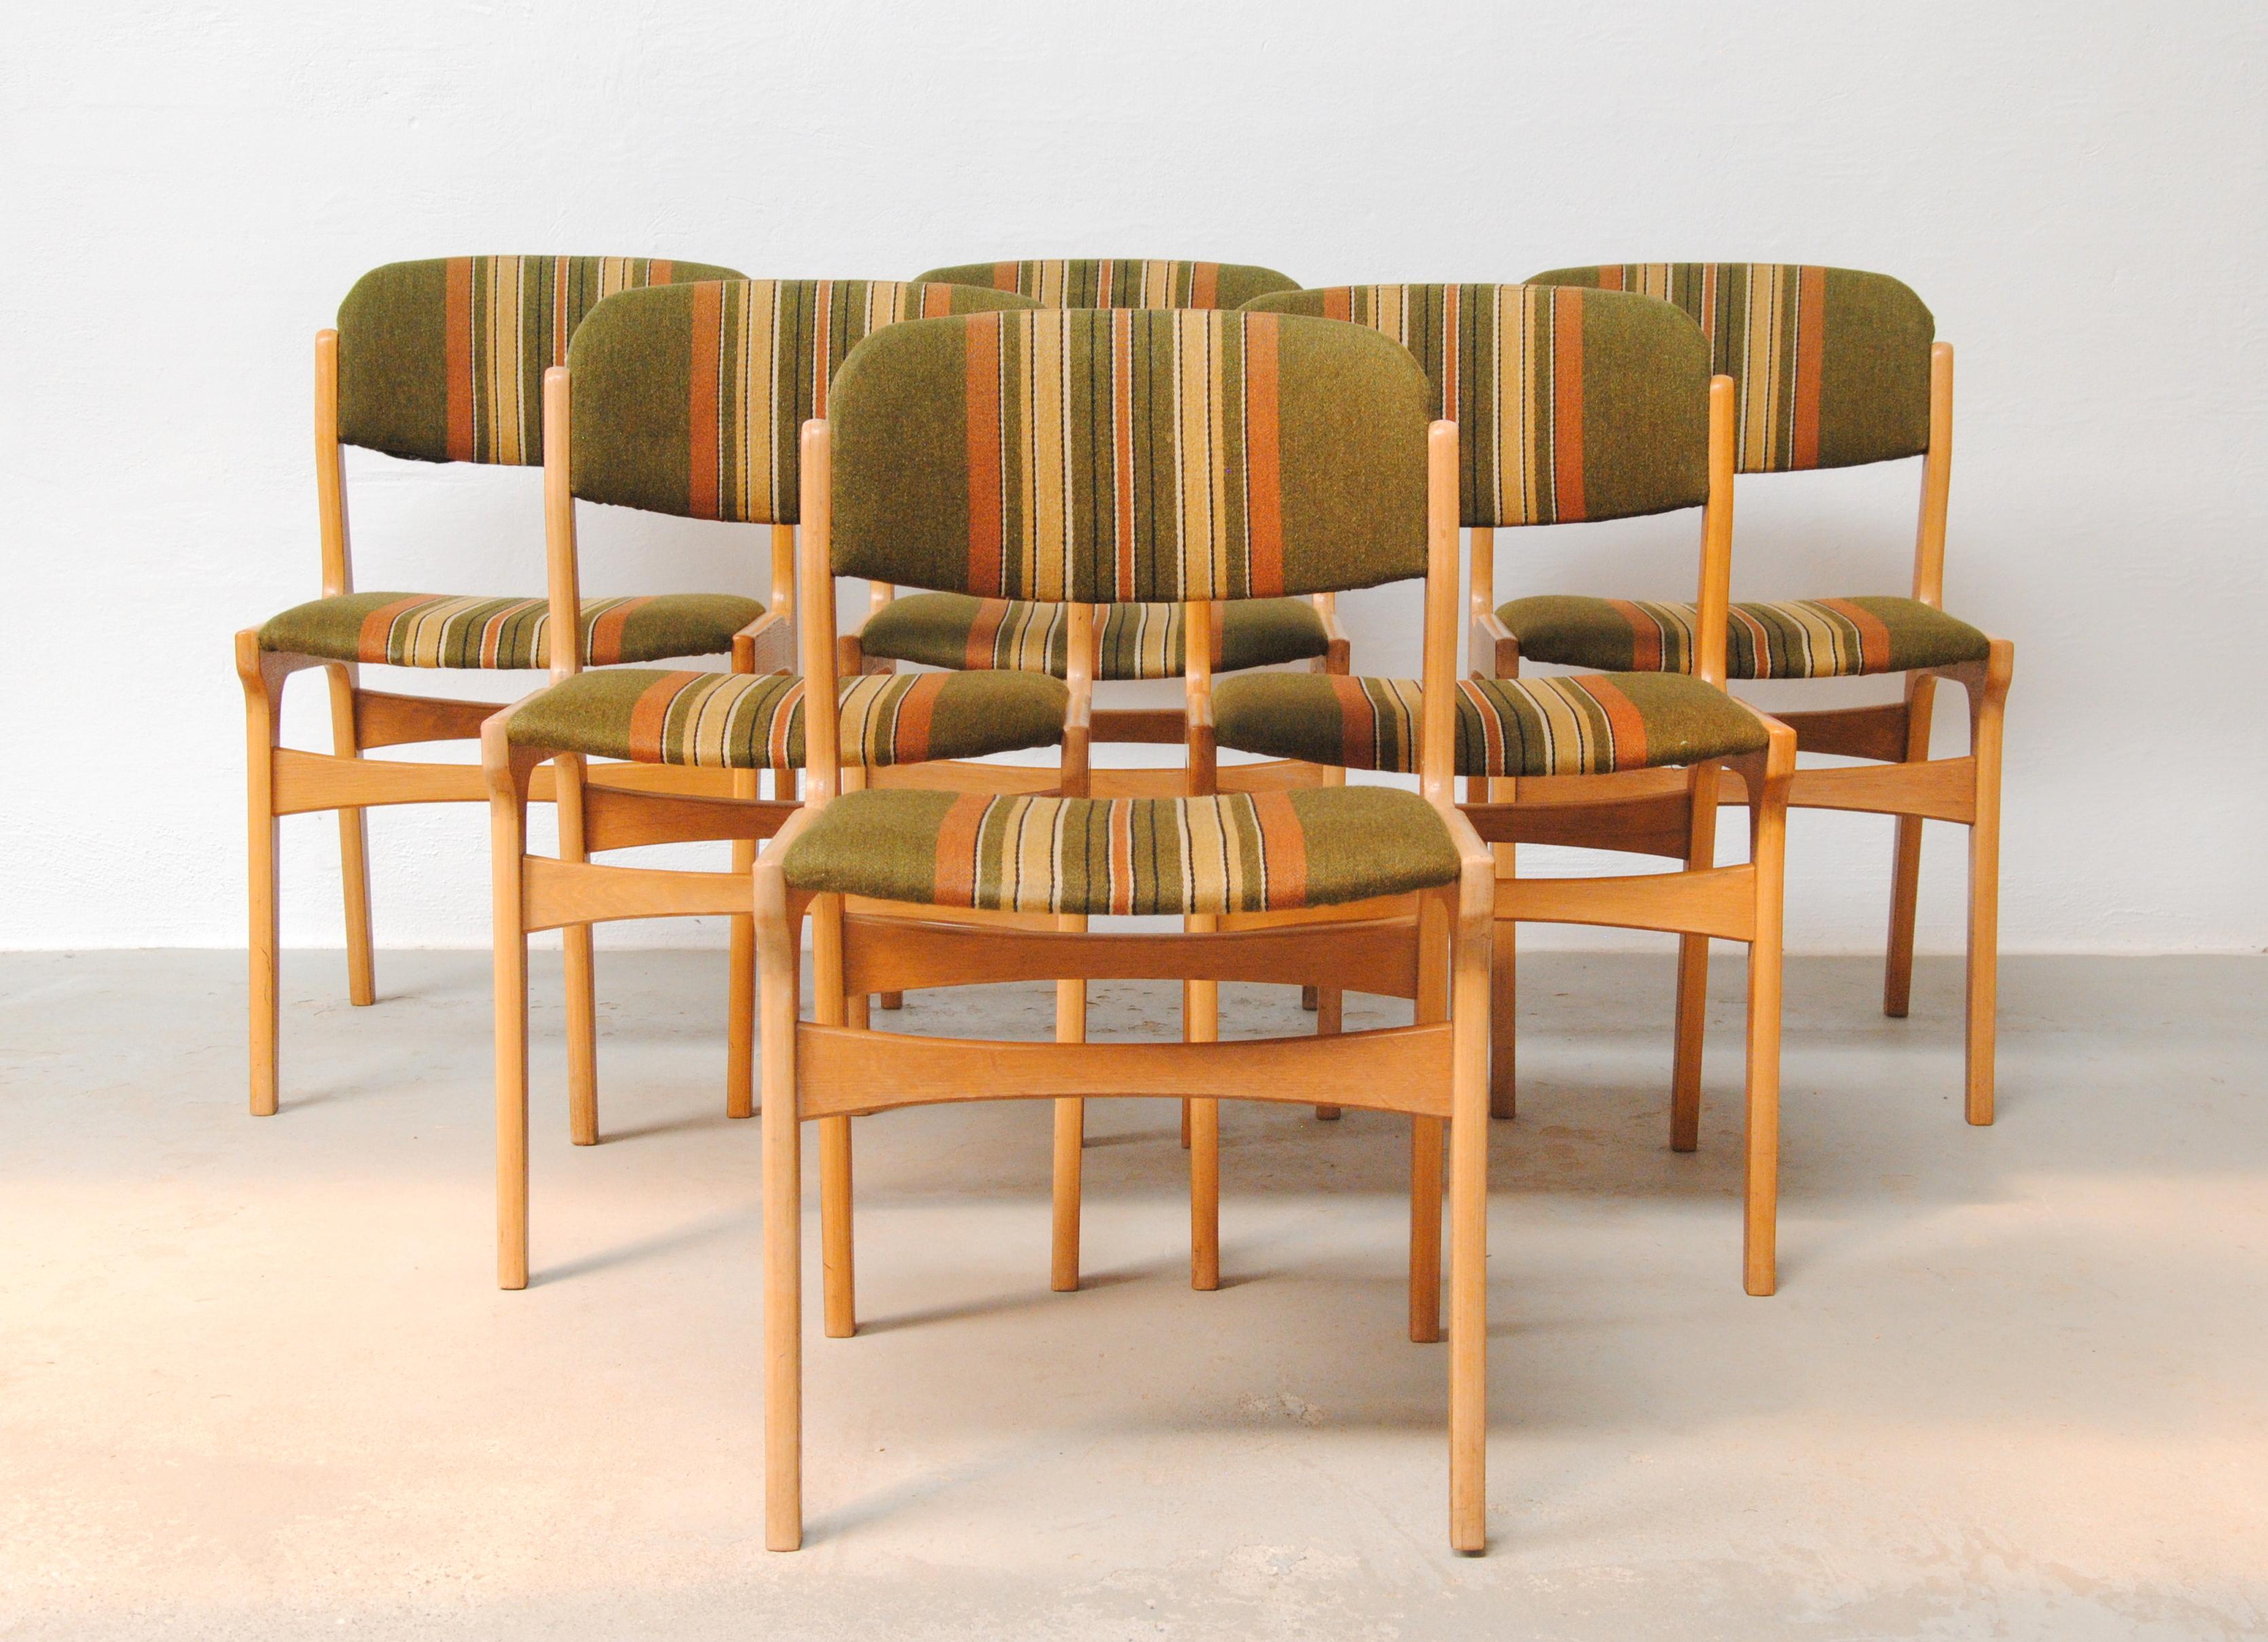 1970's Set Of Six Danish Veneered Oak Dining Chairs

The chairs with their colorfull 1970's upholstry are in good vintage condition and have been checked and refinished by our cabinetmakers to ensure they are in good vintage condition.

Feel free to